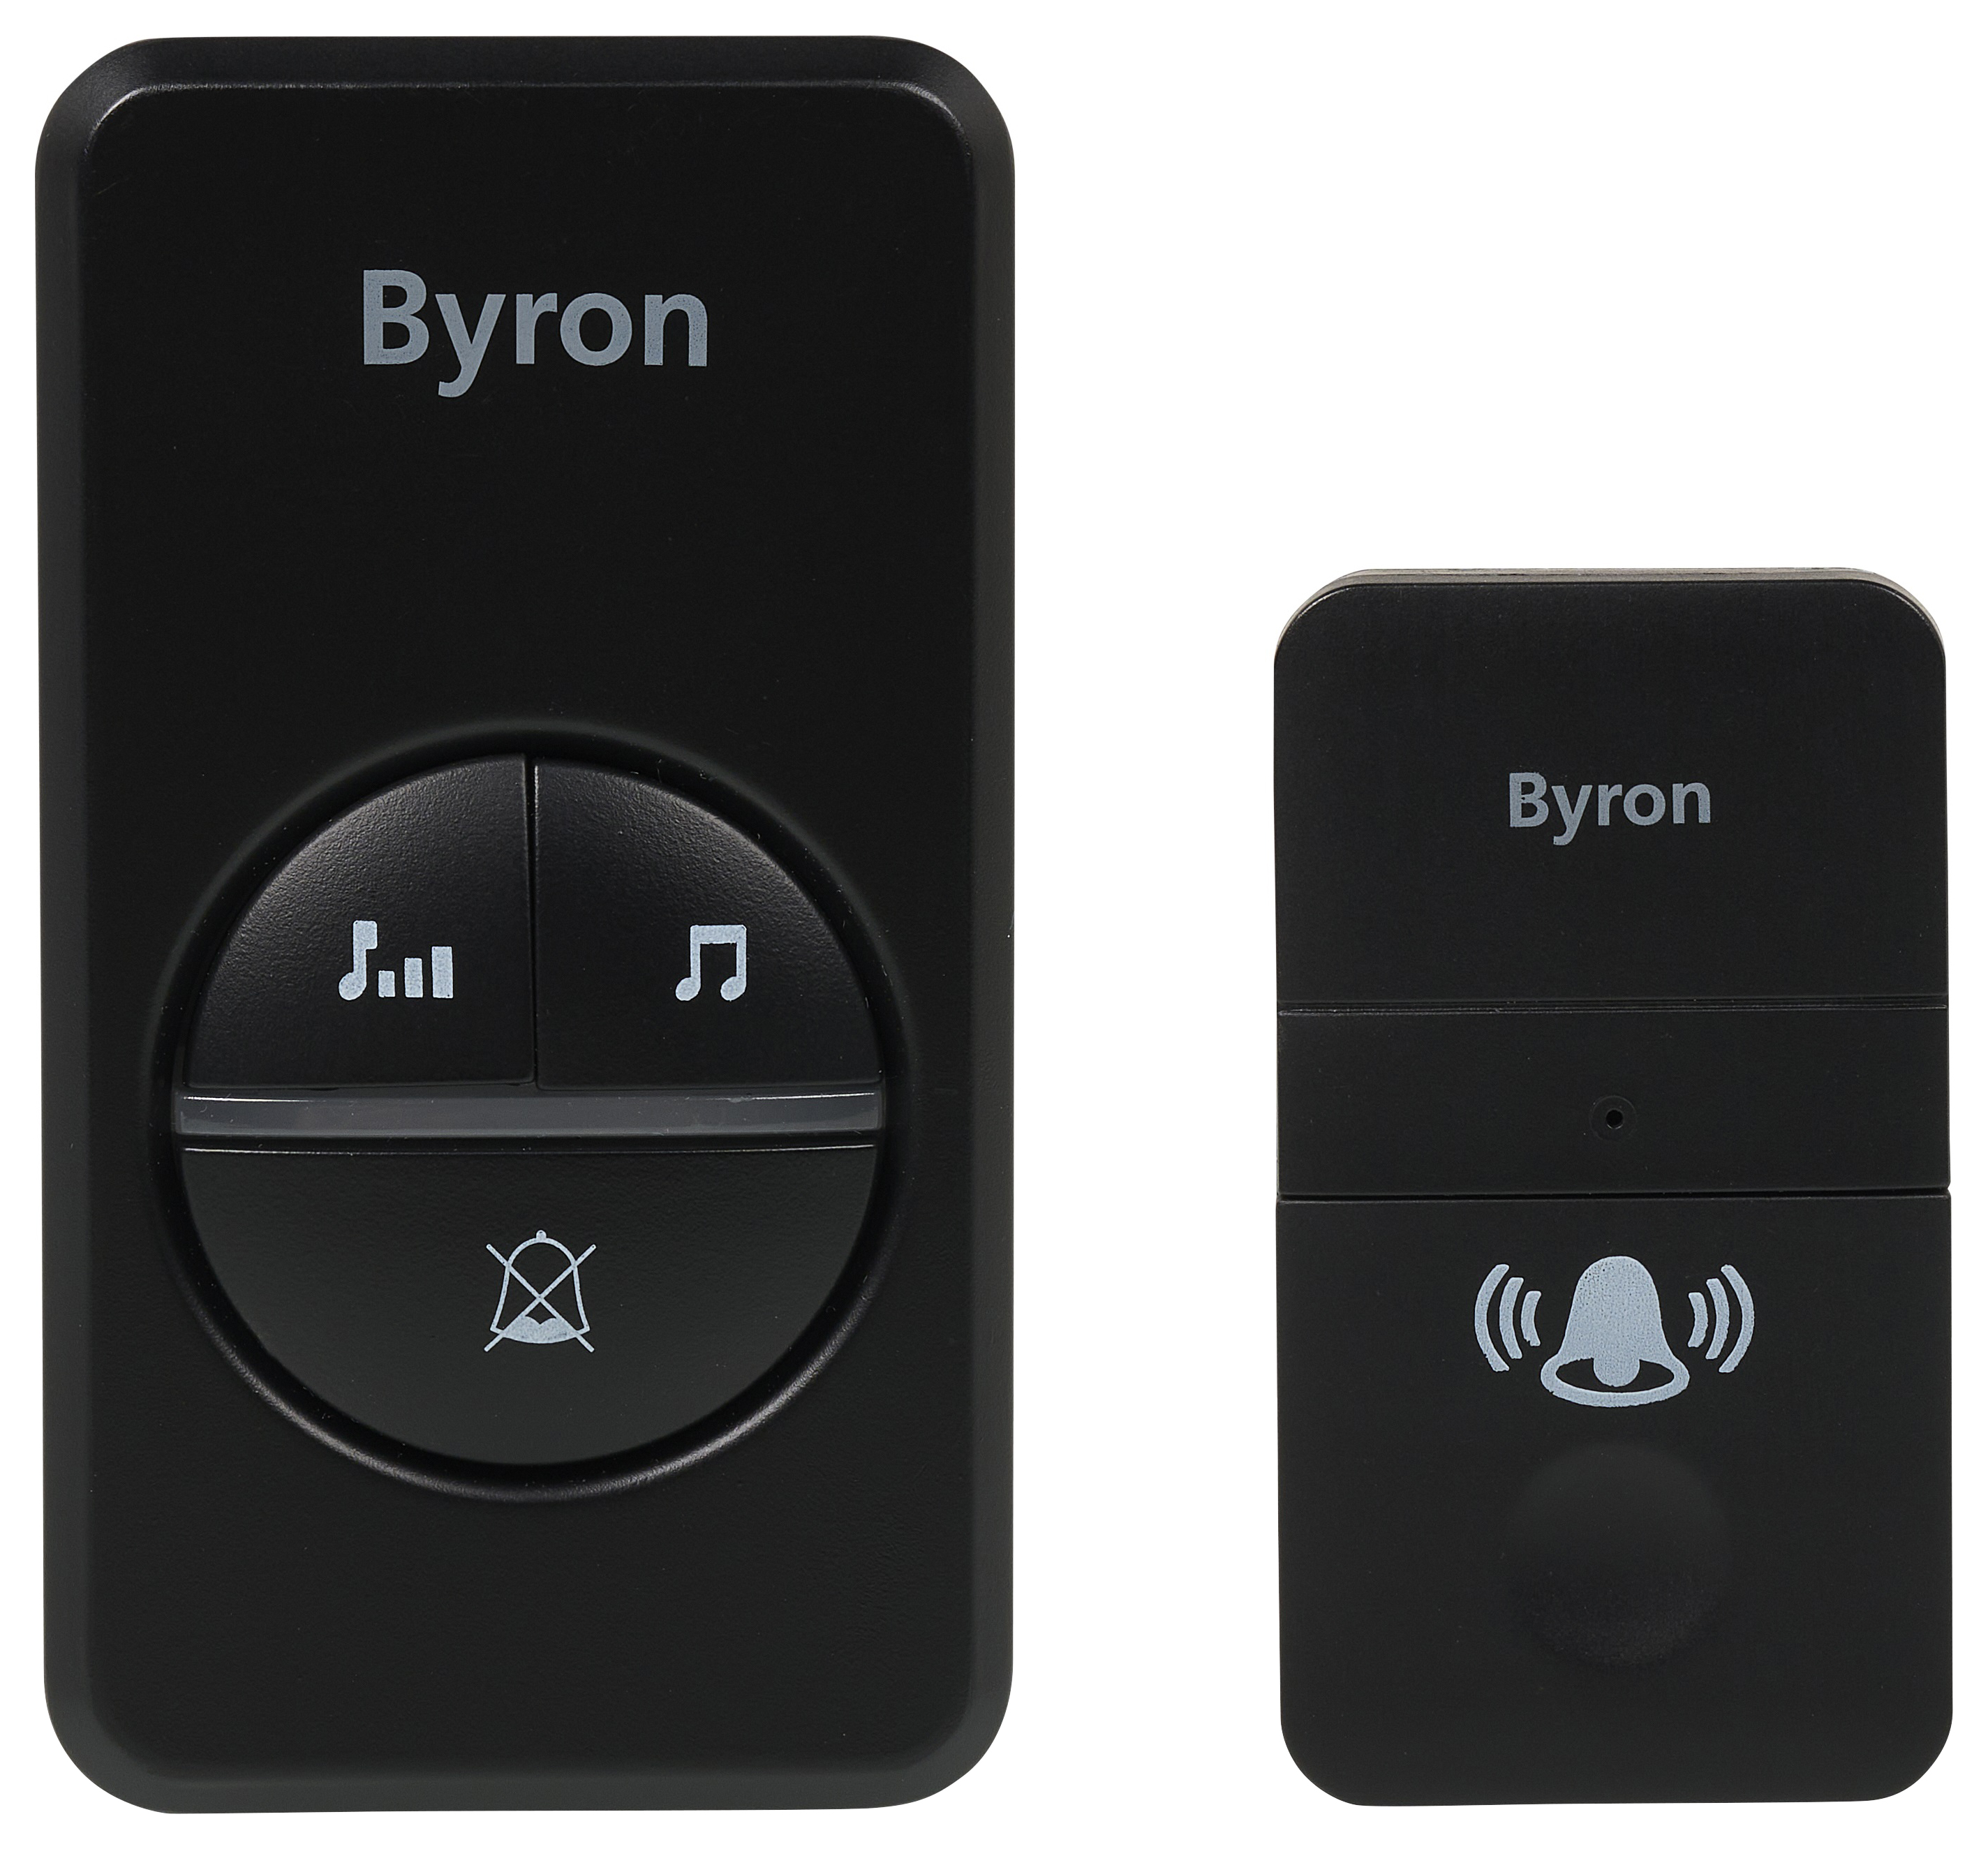 Image of Byron Kinetic Doorbell With Chime - Black